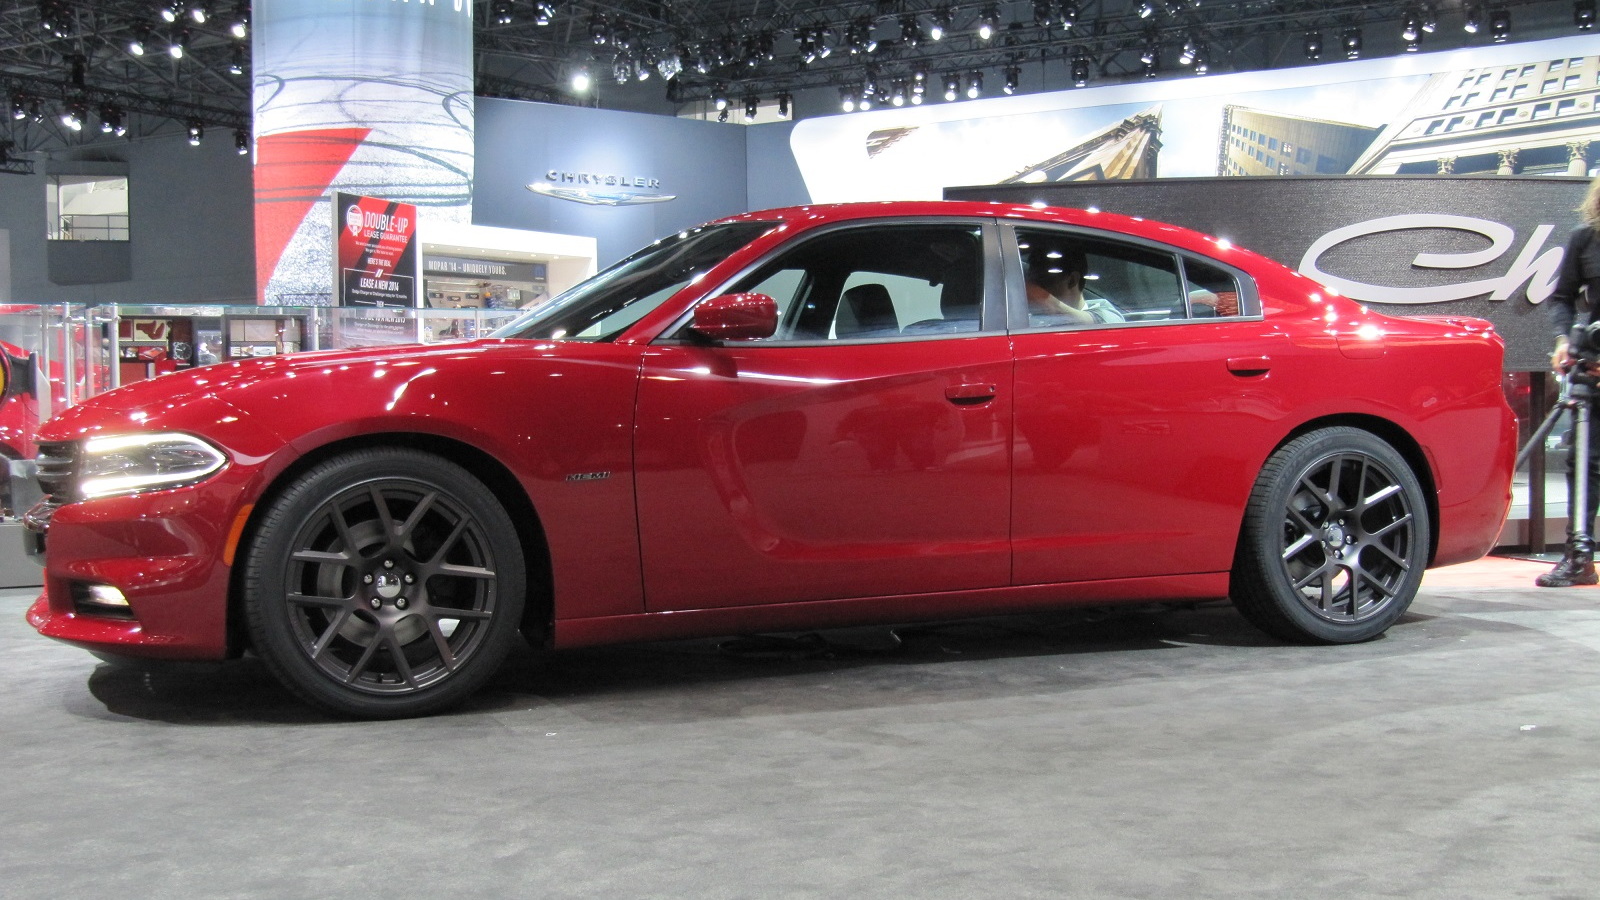 2015 Dodge Charger at 2014 New York Auto Show